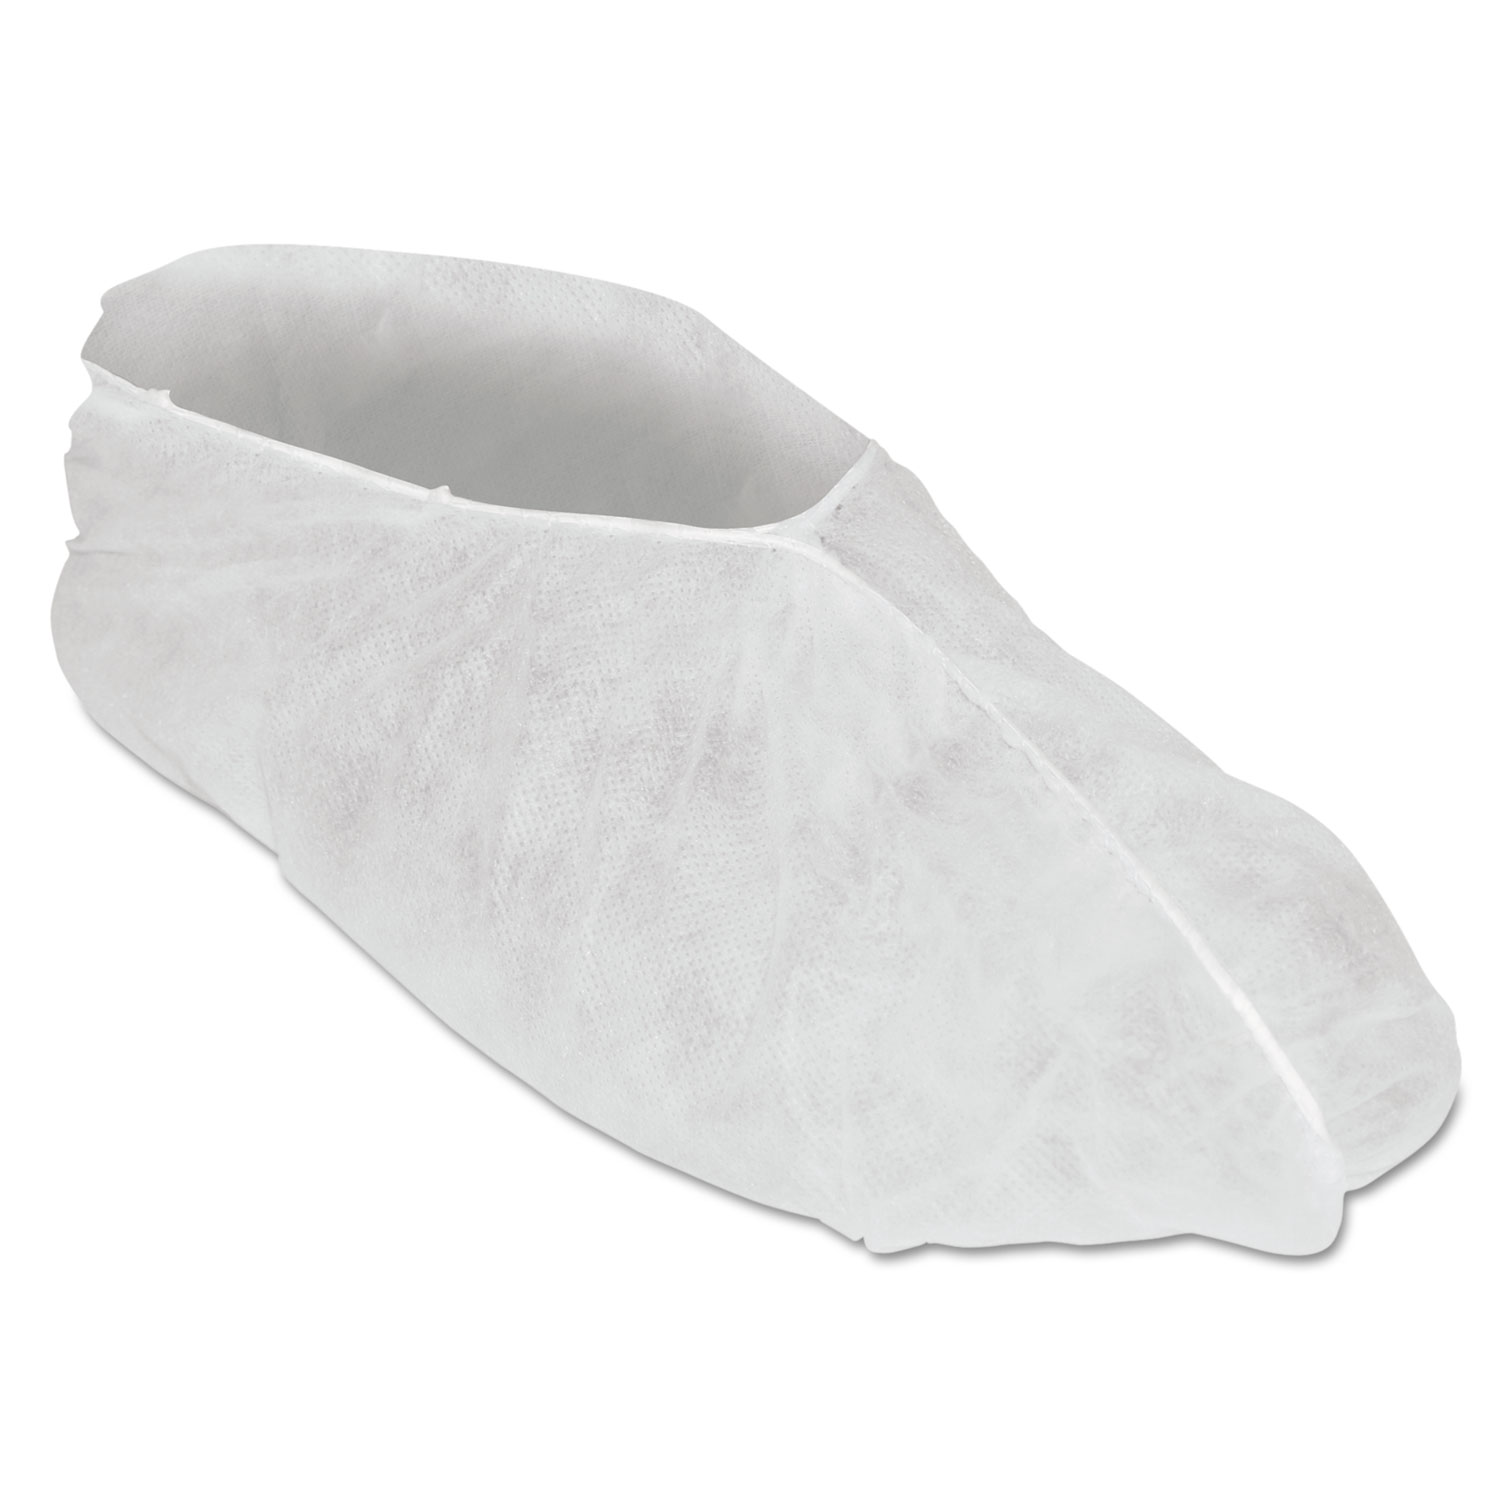  KleenGuard 36885 A20 Breathable Particle Protection Shoe Covers, White, One Size Fits All (KCC36885) 